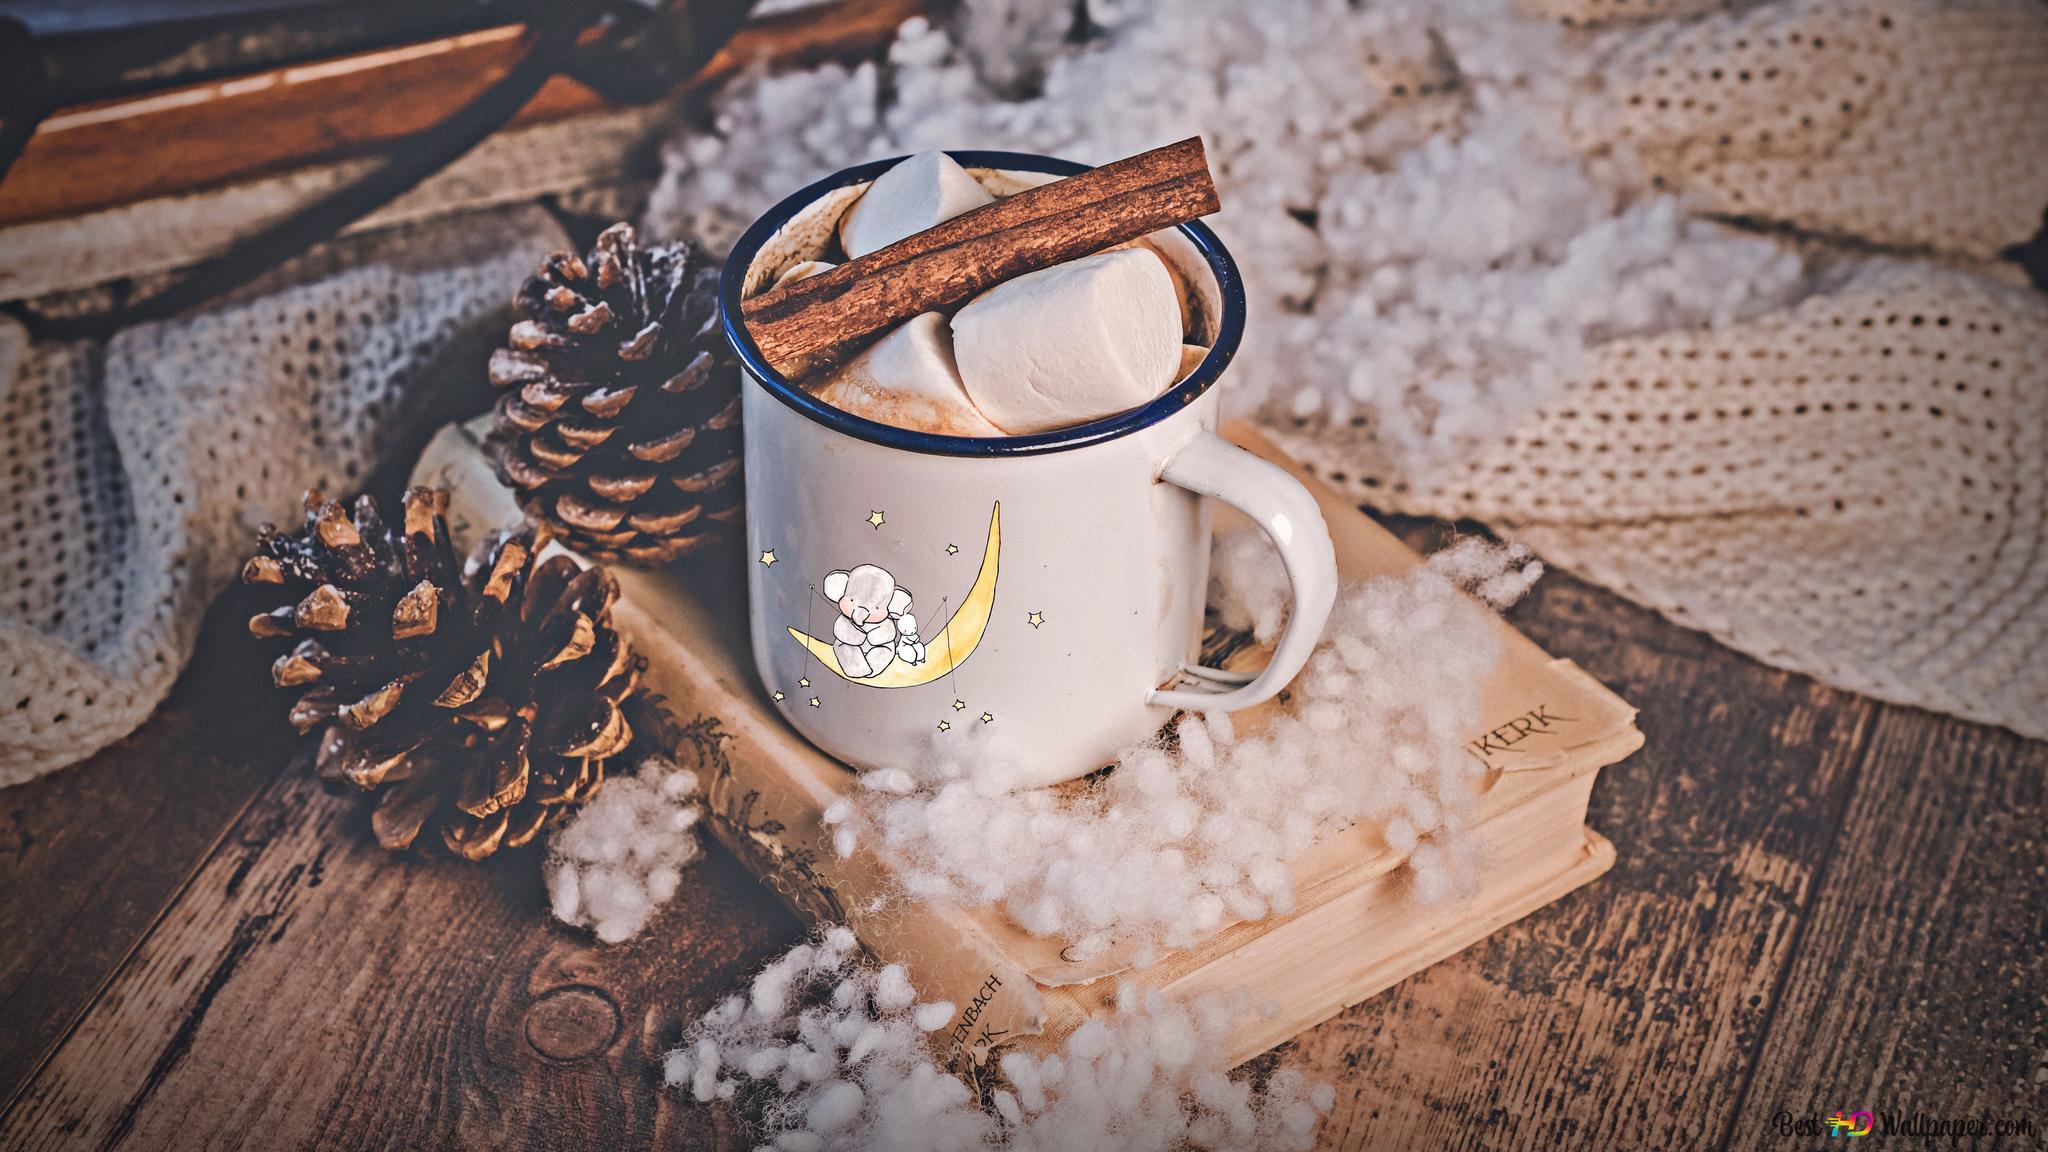 Warm hot Choco with cinnamon and Marshmallow in a white cup aesthetic 4K wallpaper download